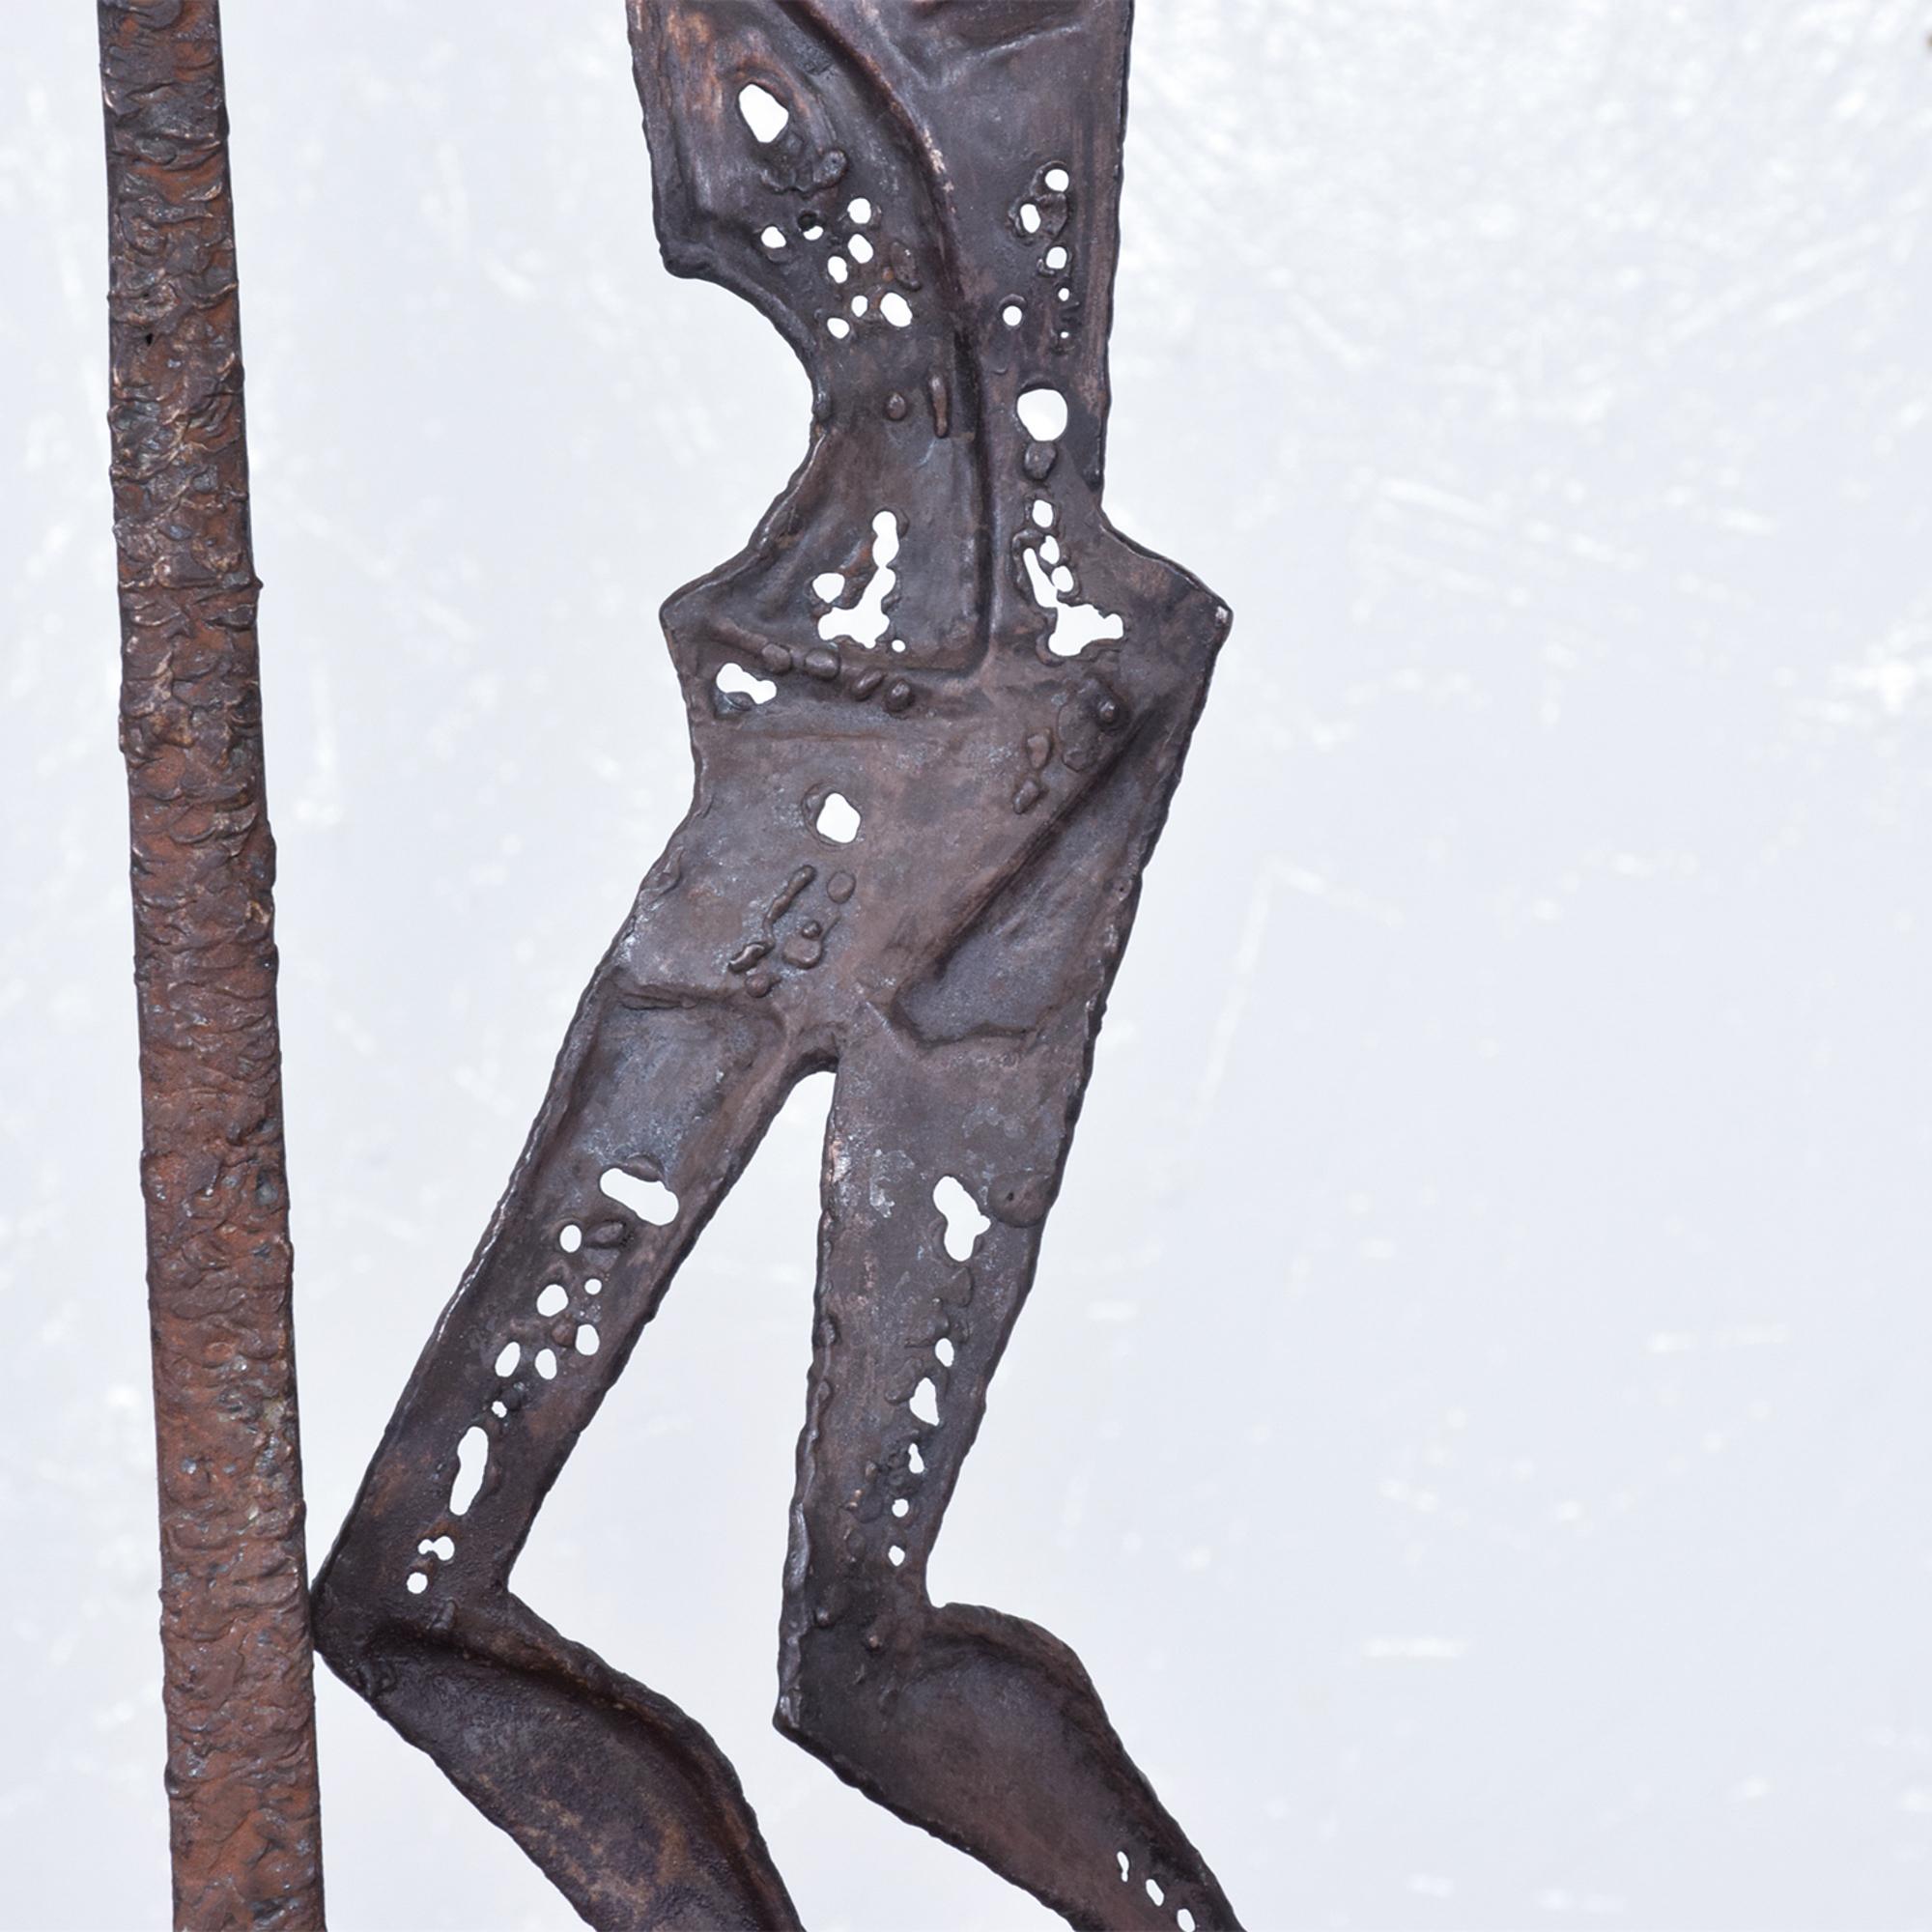 Late 20th Century Abstract Sculpture Savior of Auschwitz Tortured Metal 1970s Mexico by EMAUS